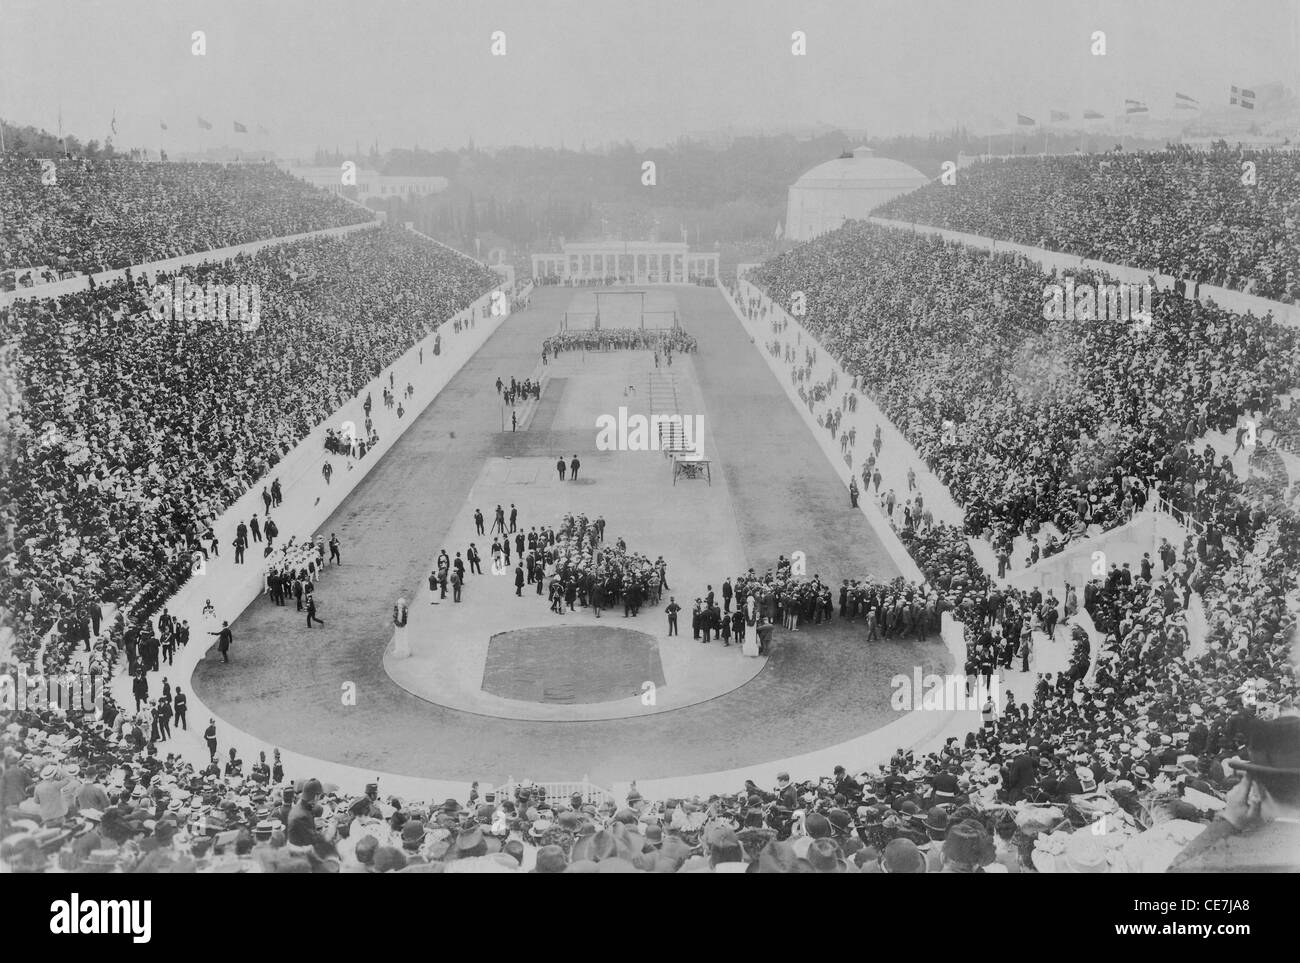 Greece, Attica, Athens, Opening ceremony of the 1896 Games of the I Olympiad in the Panathinaiko stadium. Stock Photo